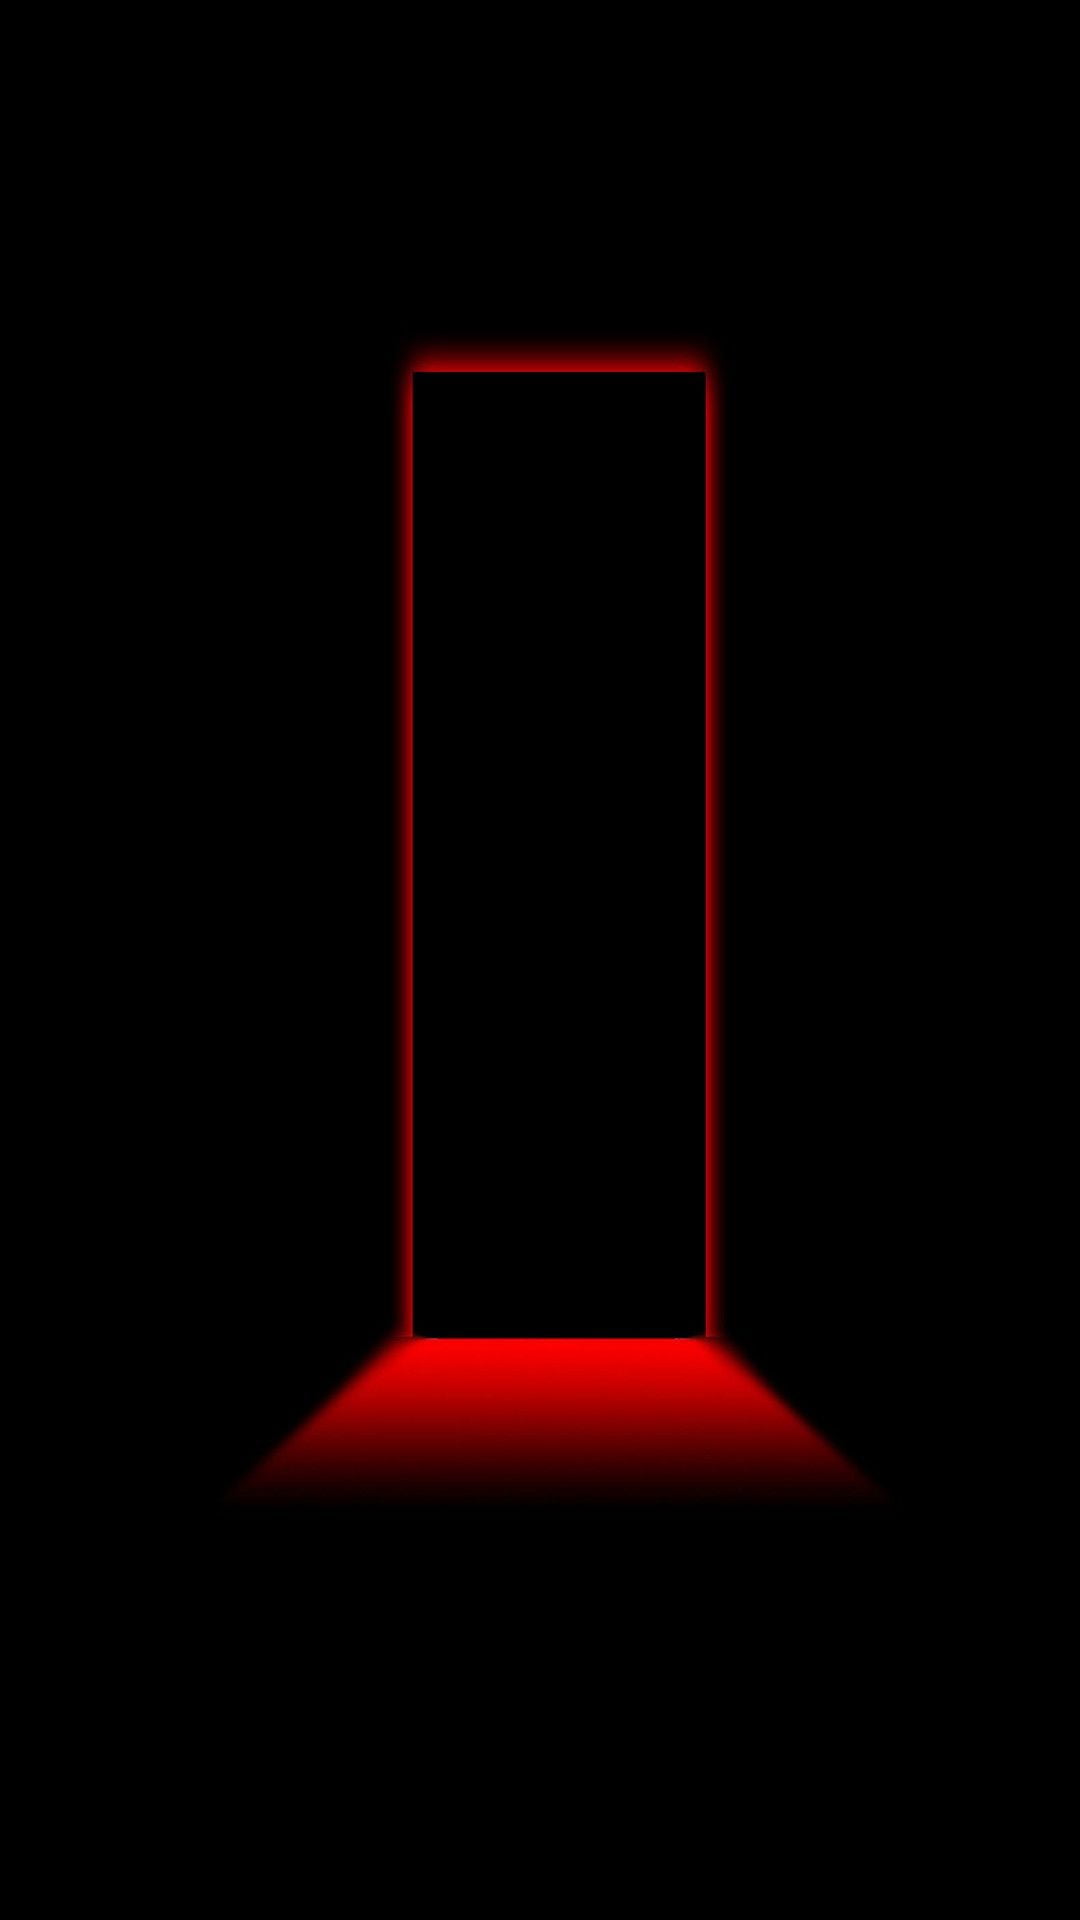 3D black and red iphone wallpaper 2021 3D iphone wallpaper